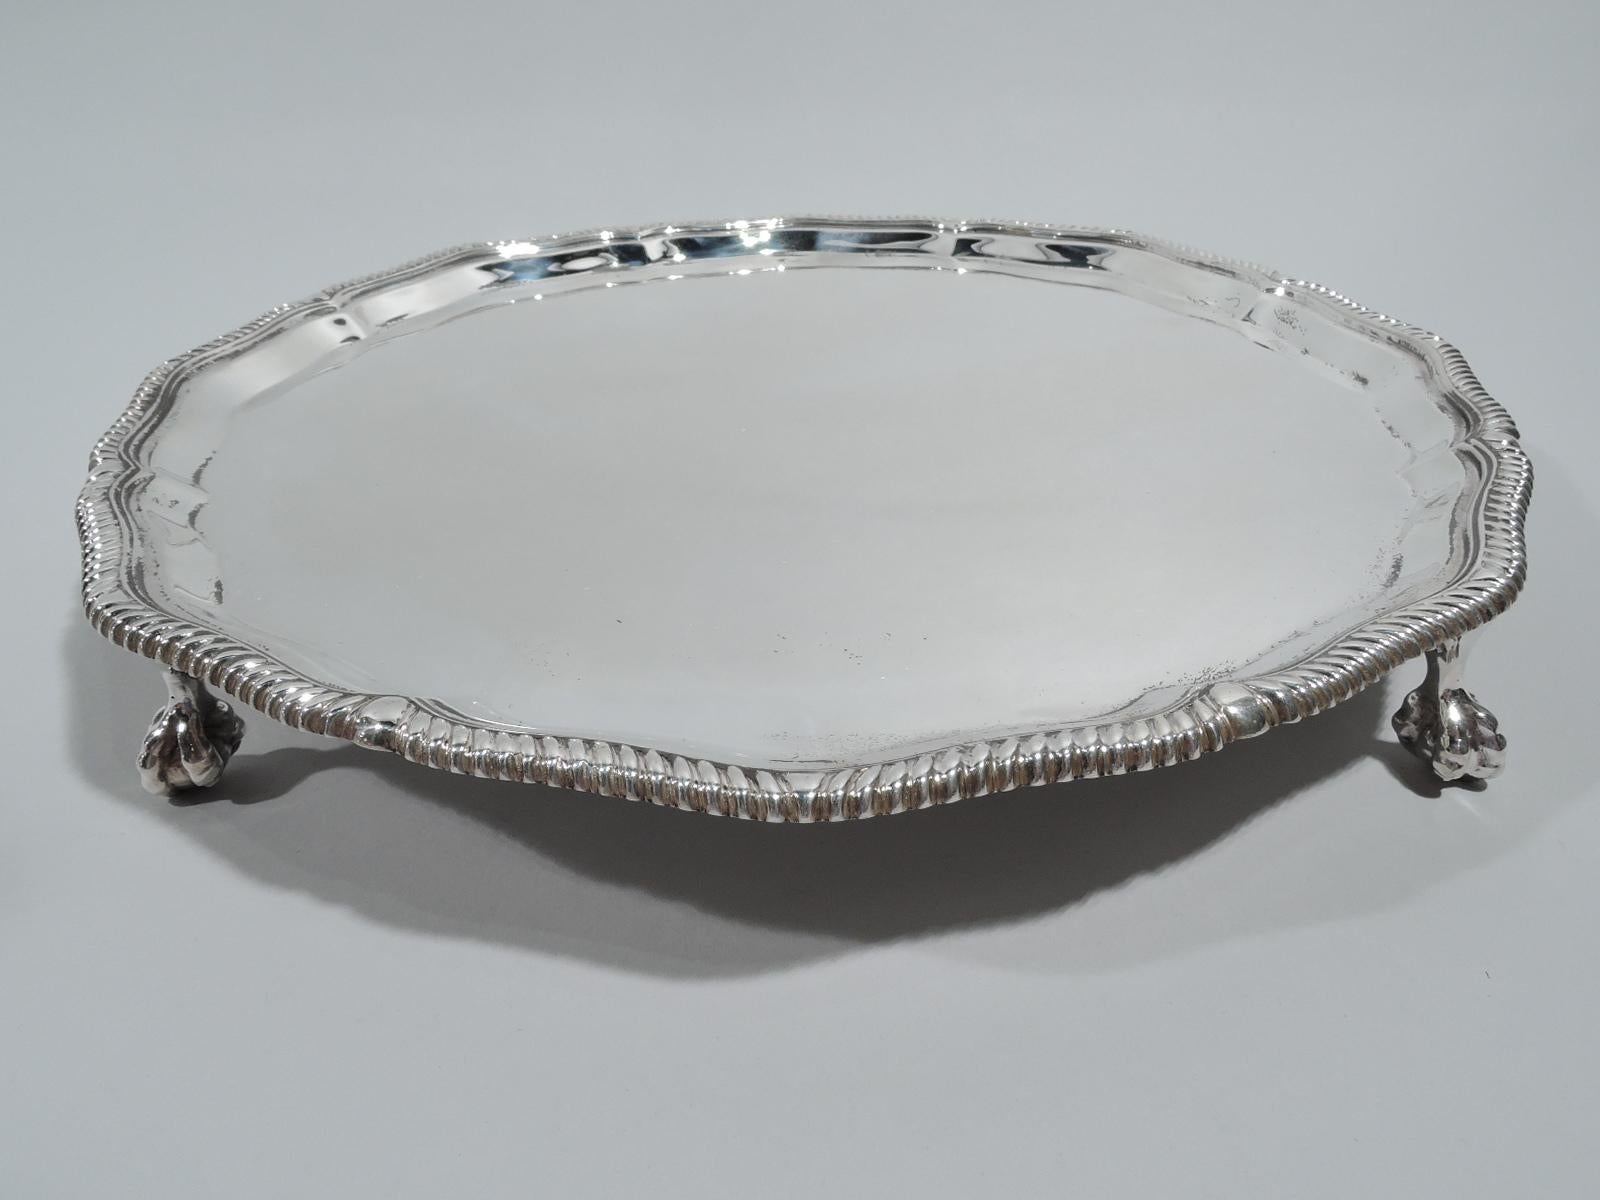 George V sterling silver salver. Made by Thomas Bradbury & Sons in Sheffield in 1921. Round shaped with gently scrolled and gadrooned rim and tapering sides. Four claw-and-ball feet. Traditional Neoclassicism. Fully marked. Weight: 19.5 troy ounces.